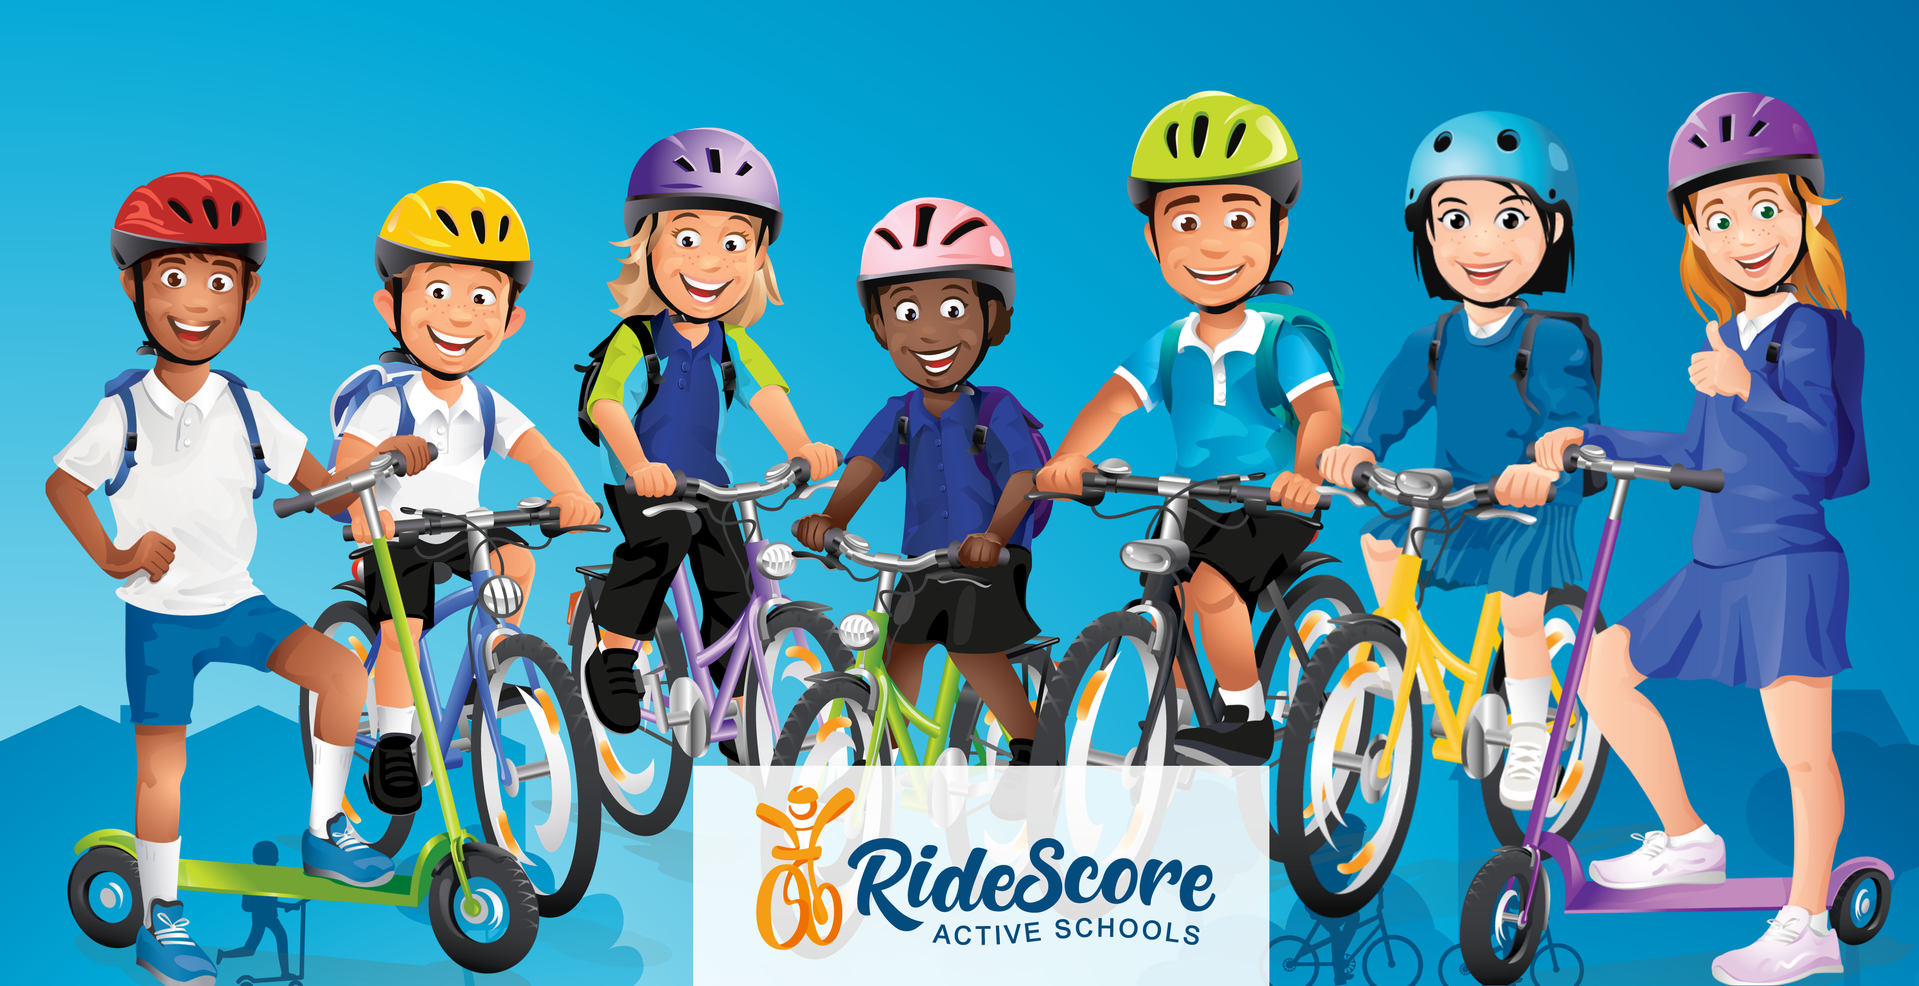 92979_RideScore_characters.png